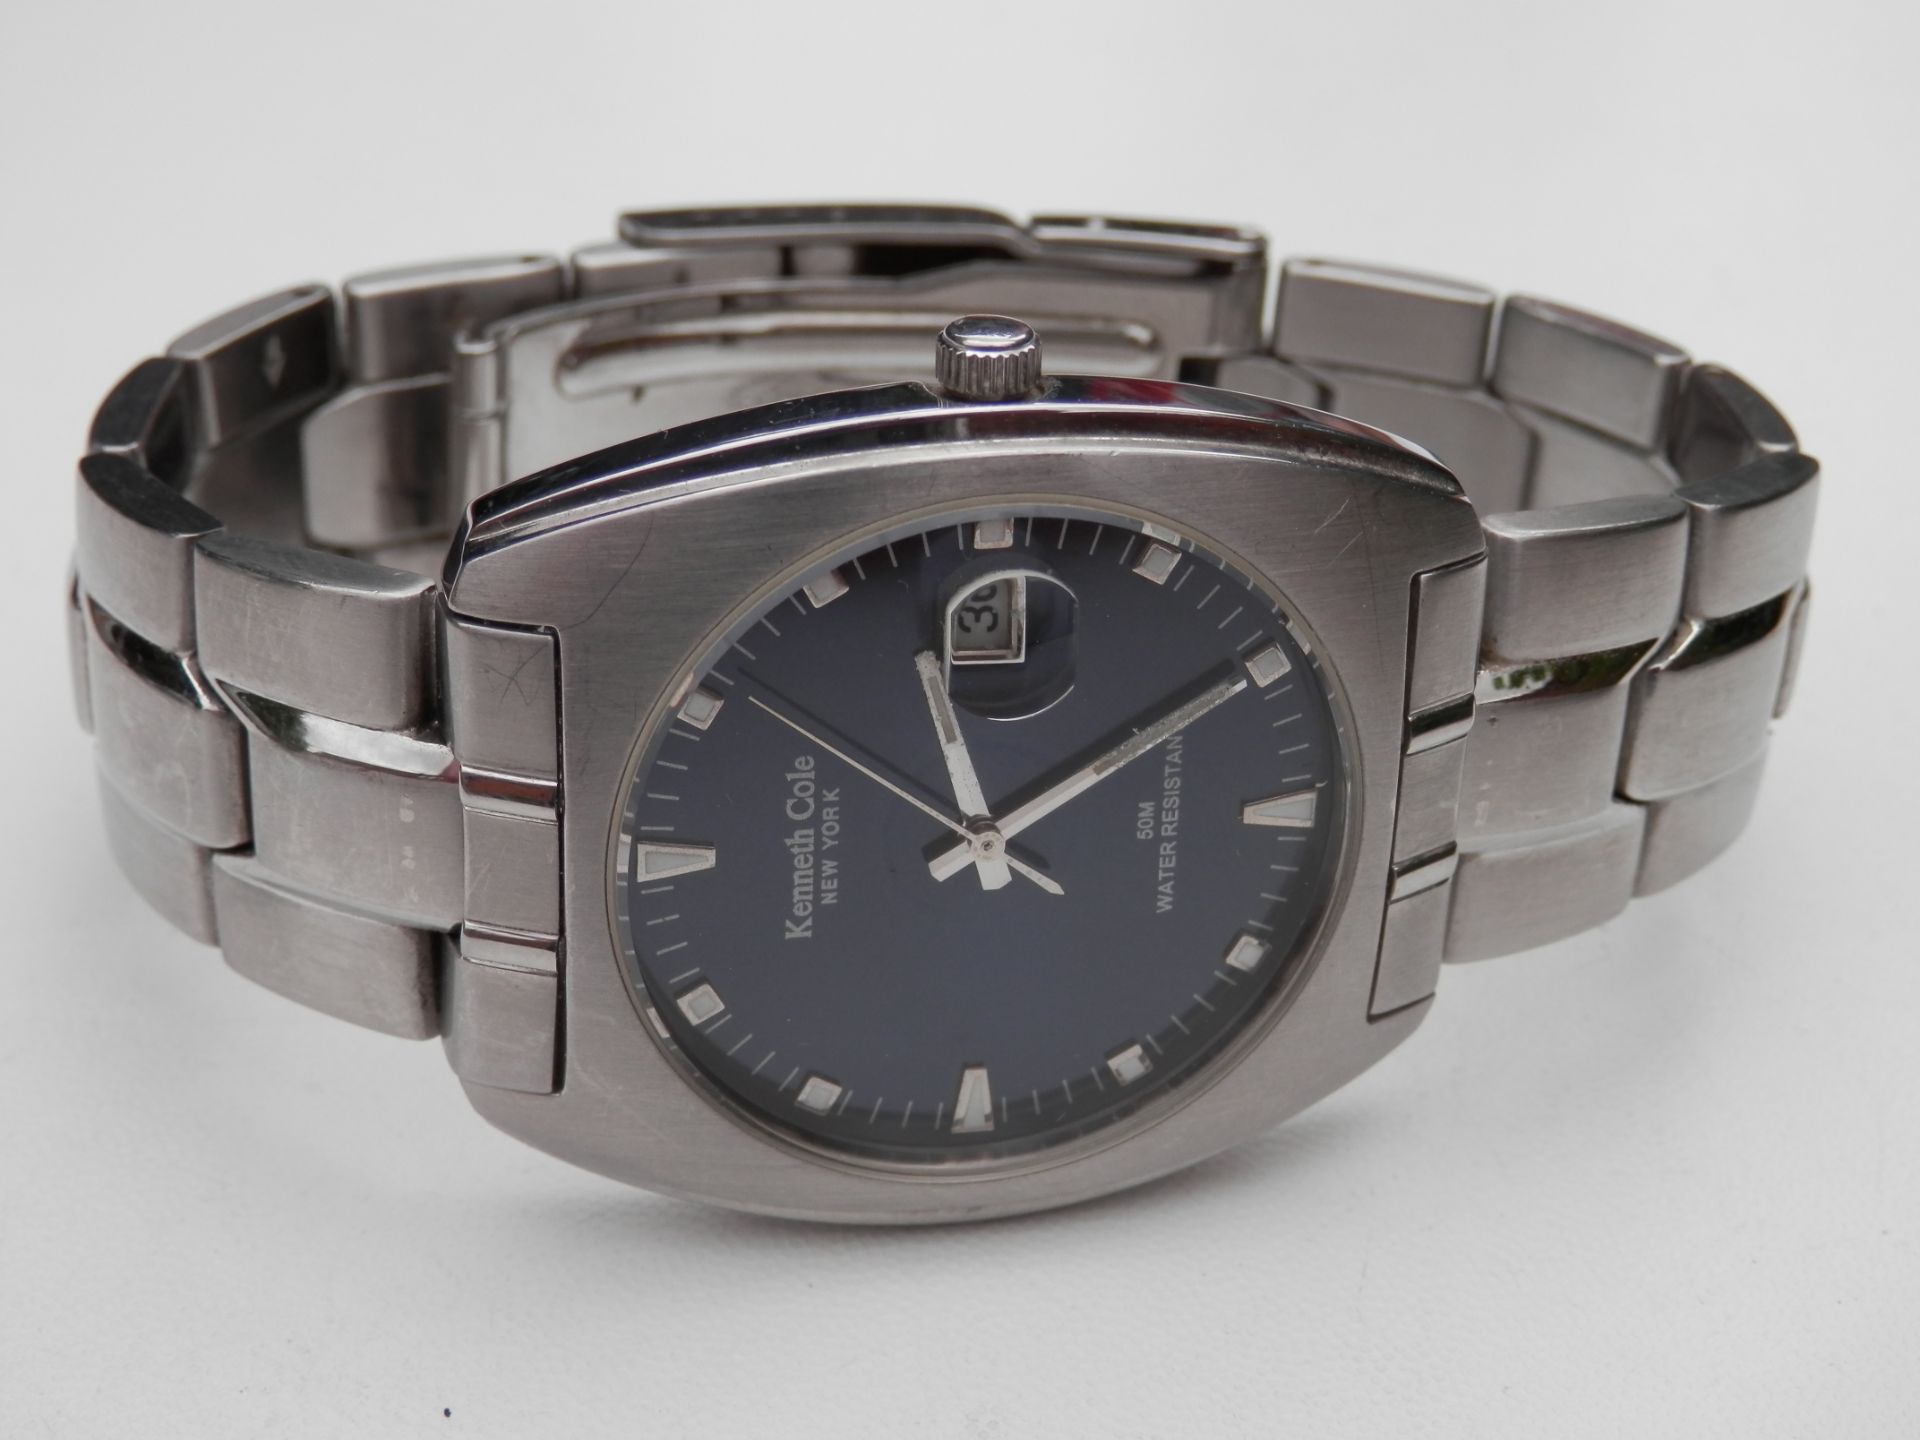 GENTS BOXED KENNETH COLE NEW YORK, FULL STAINLESS 50M WR QUARTZ DATE WATCH, FULLY WORKING. RRP $125 - Image 7 of 11